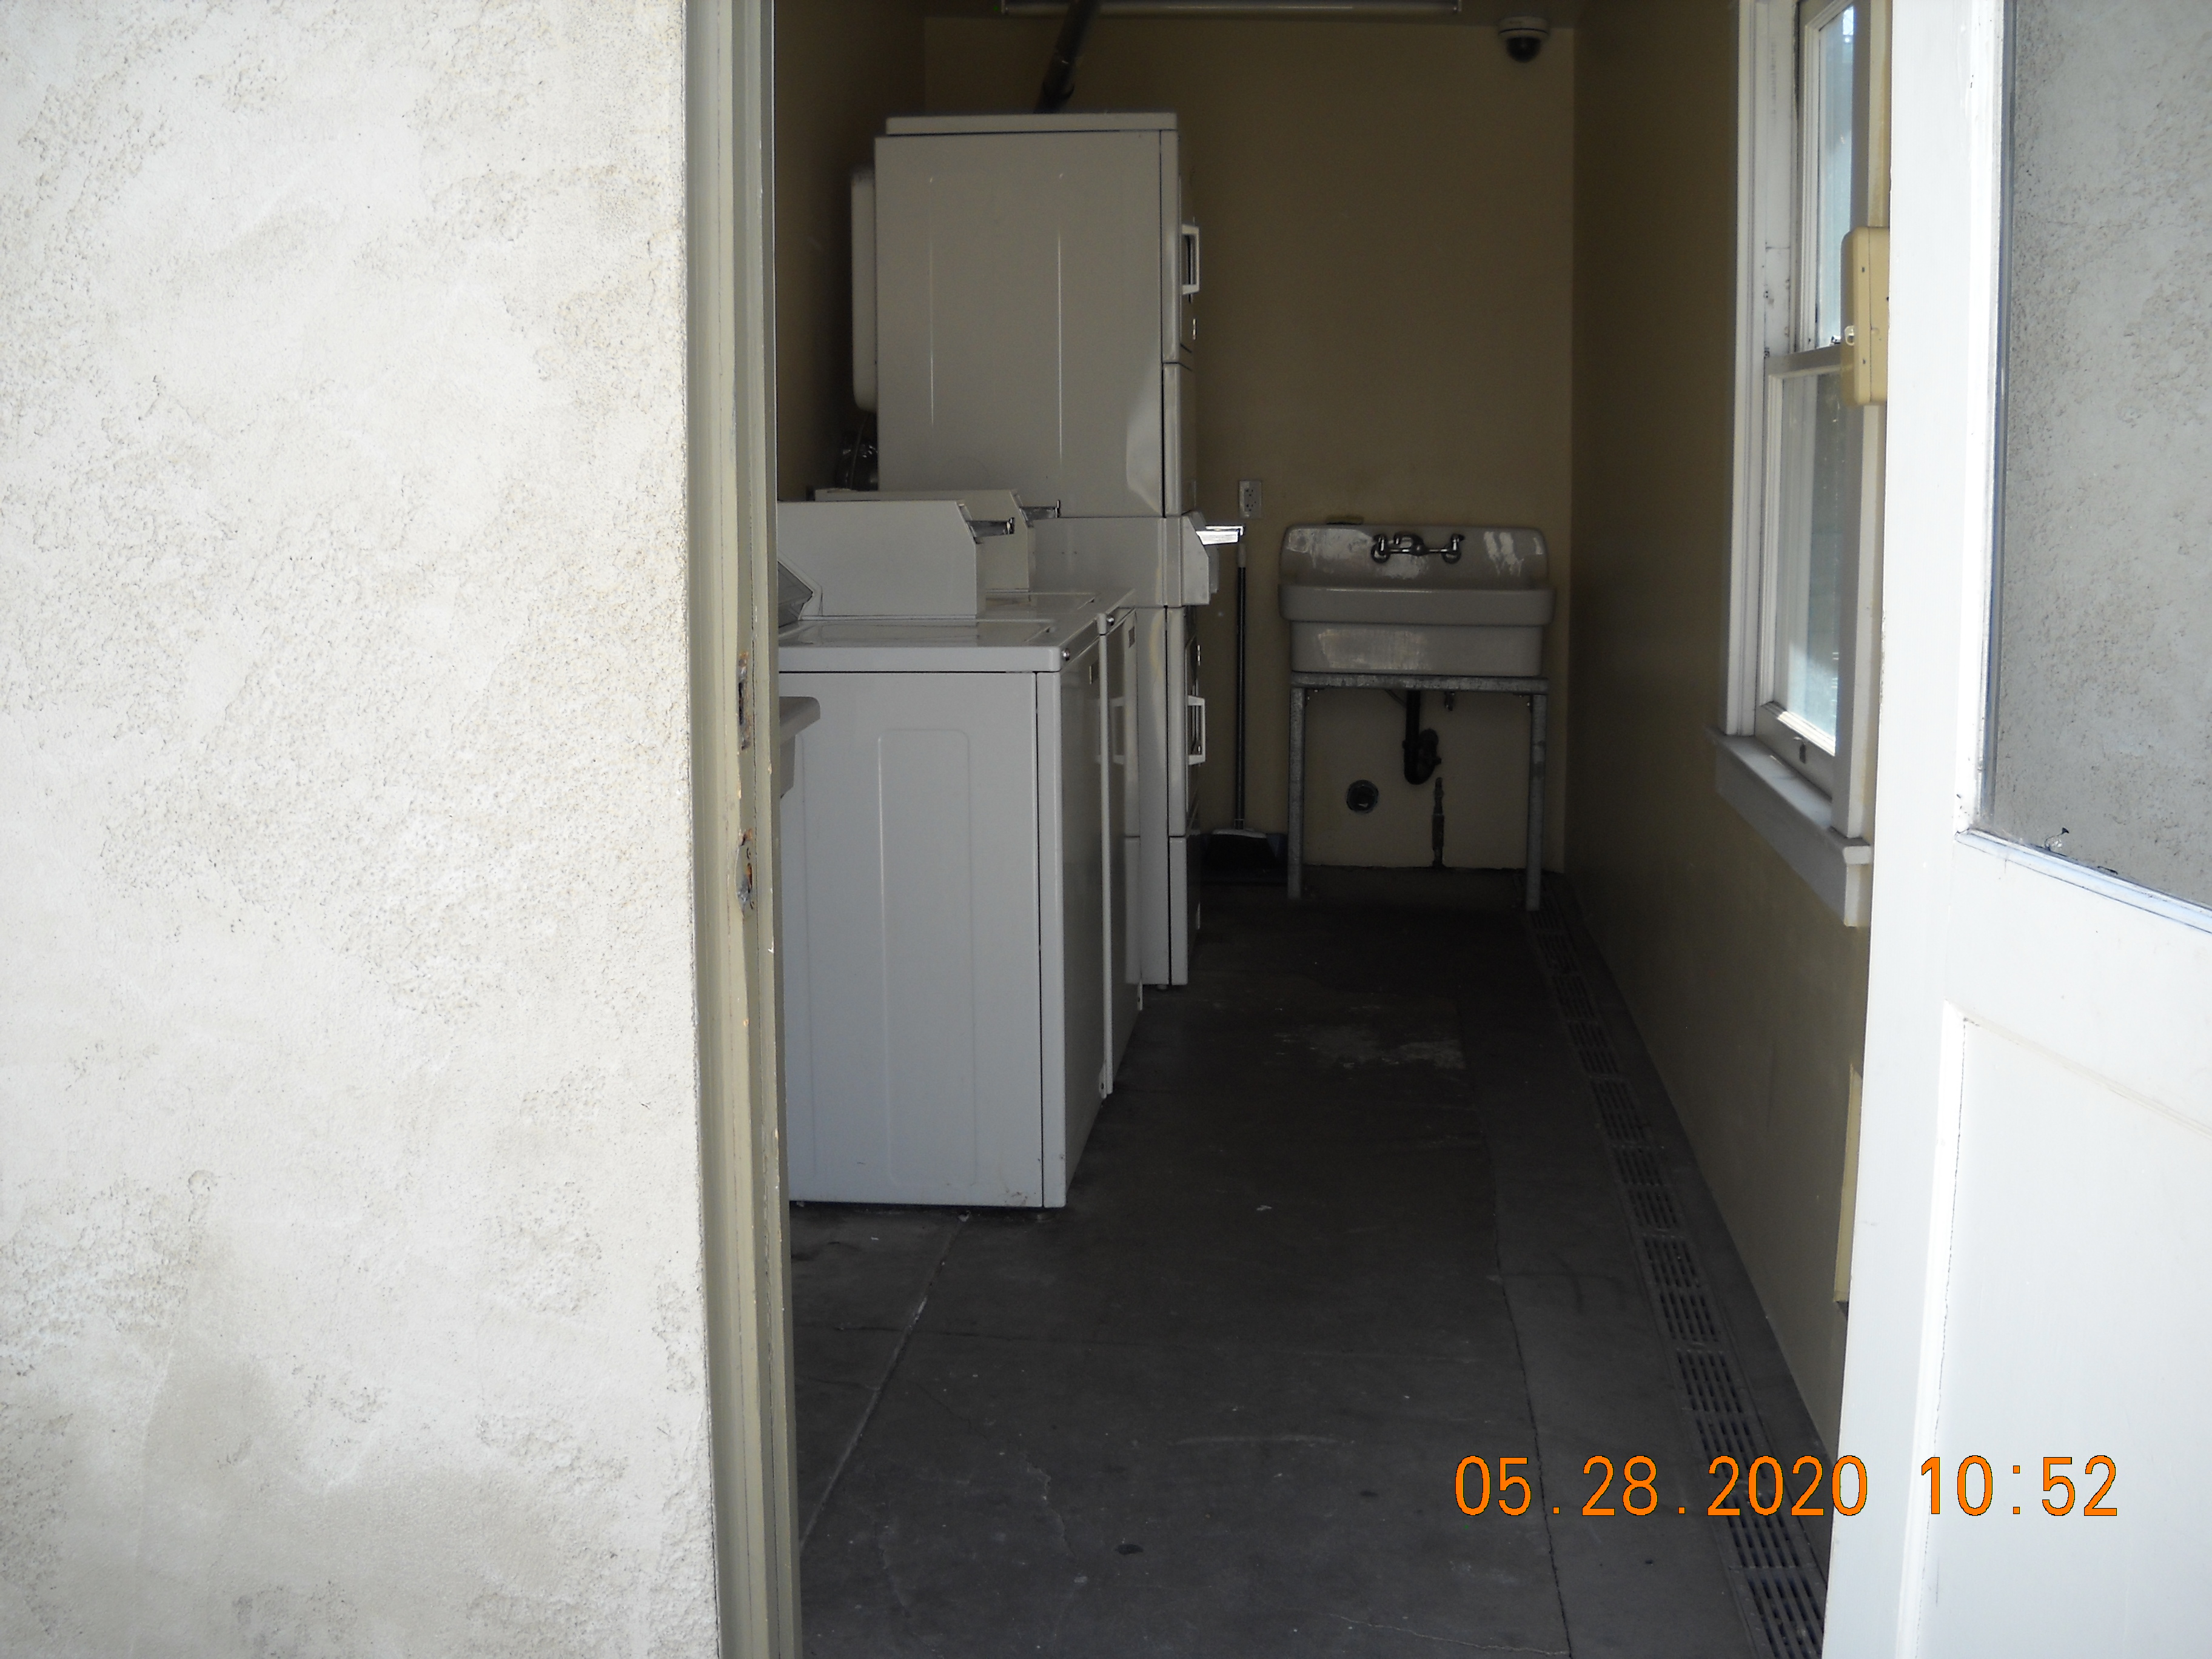 View of a laundry room with two washer and two dryers. There is a sink and a window.